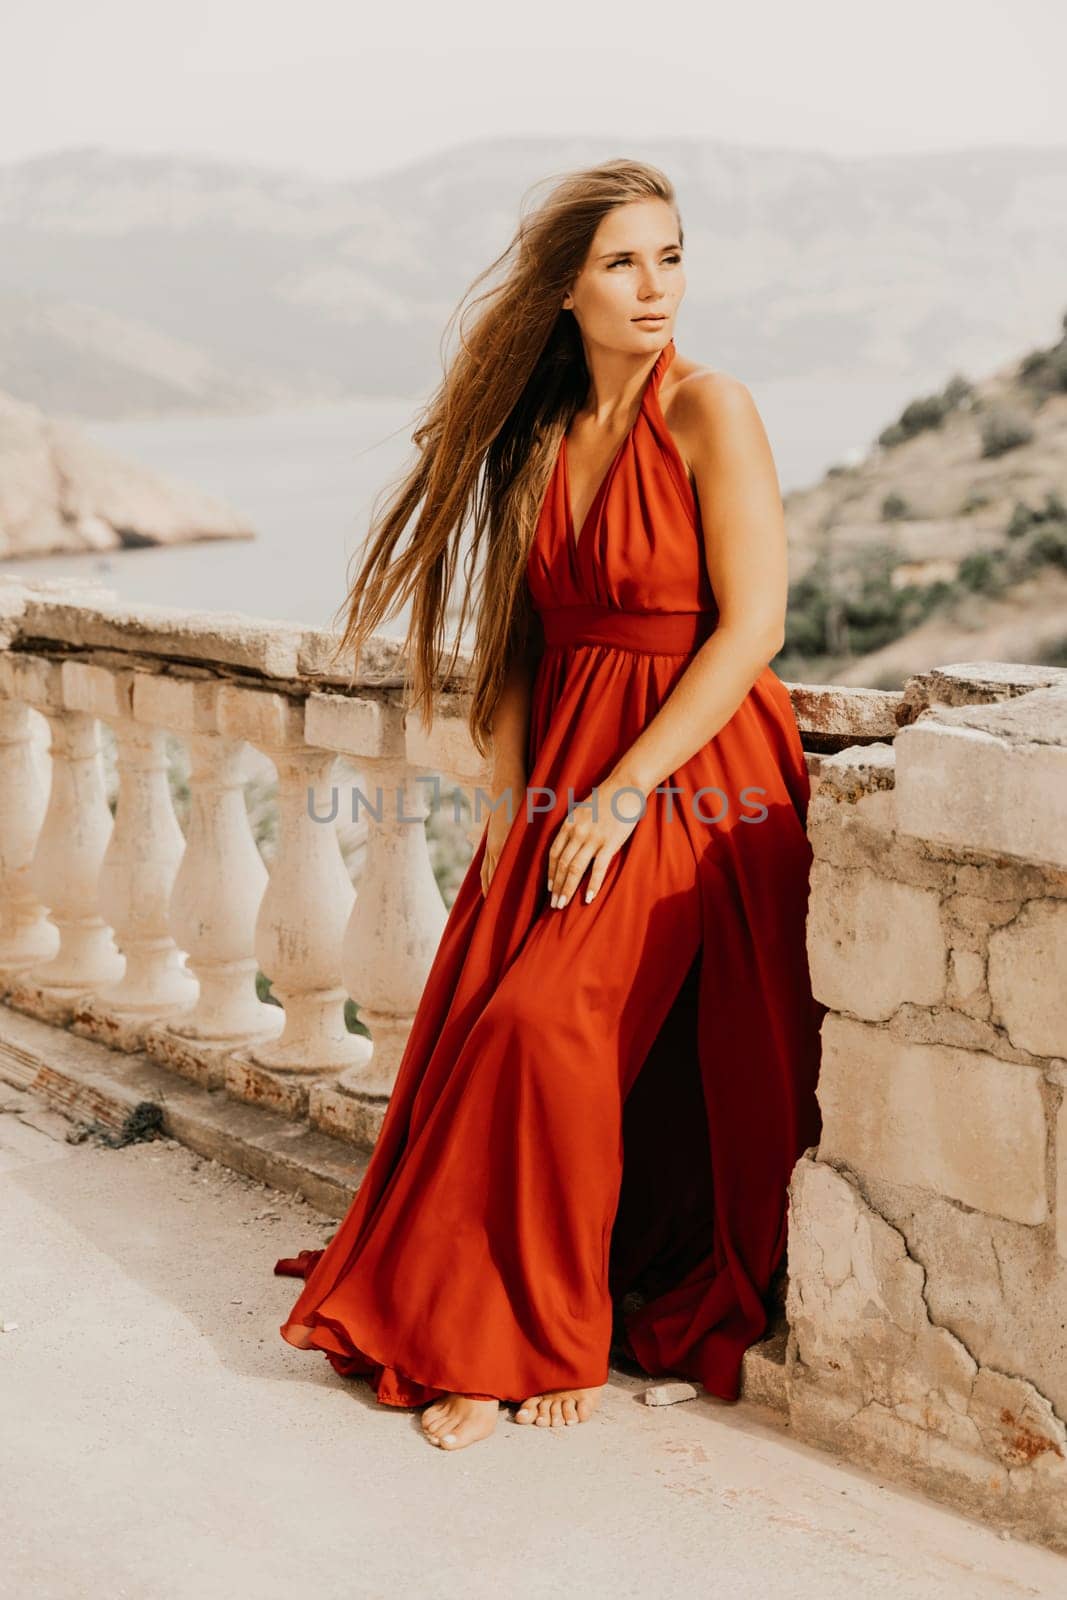 Woman red dress. Summer lifestyle of a happy woman posing near a fence with balusters over the sea